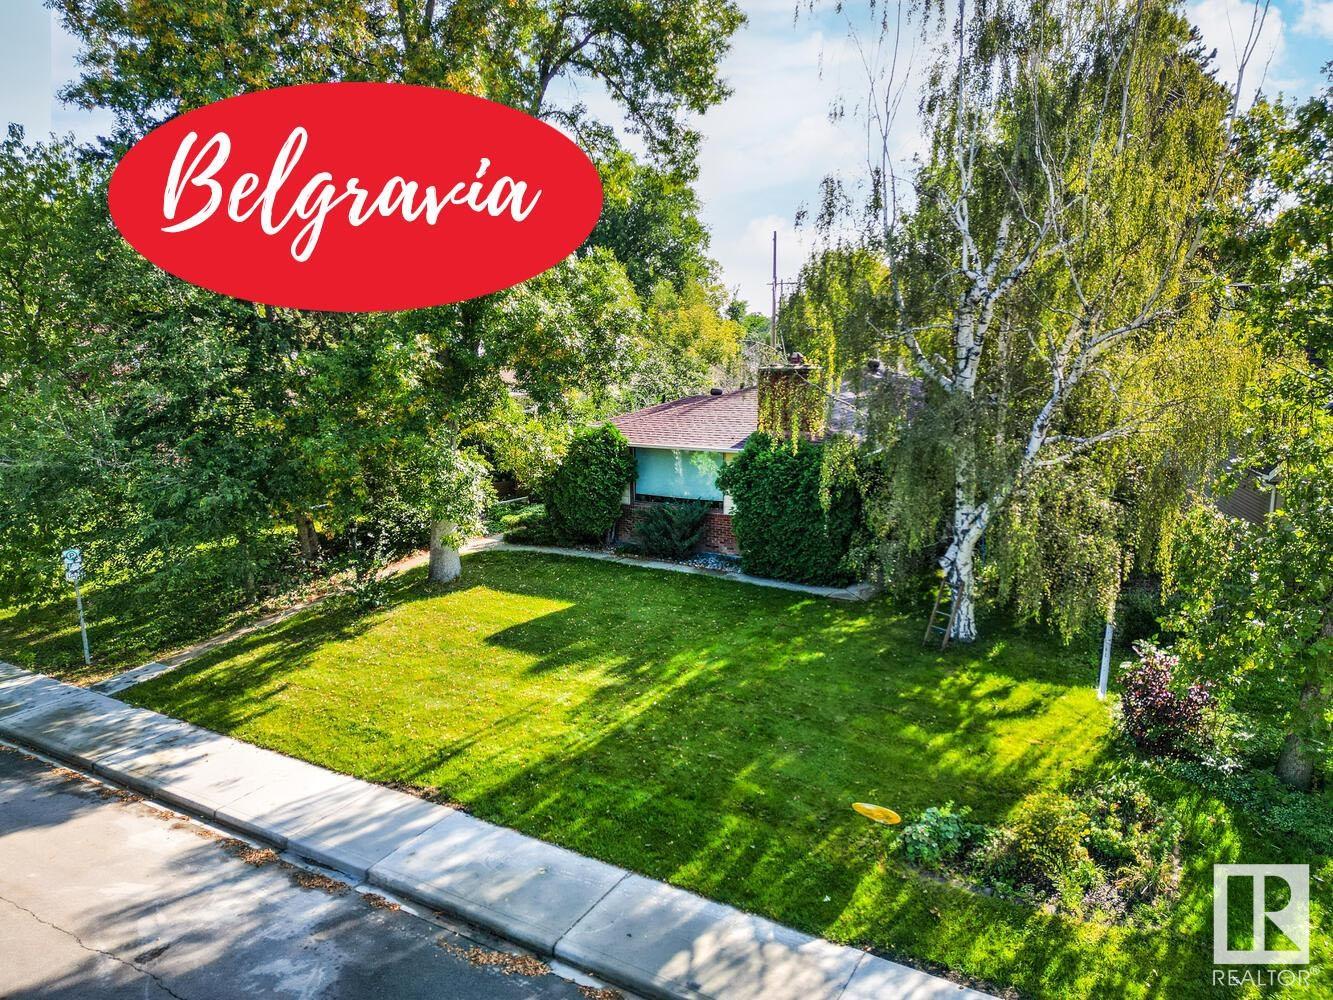 Belgravia Detached Single Family for sale:  4 bedroom 1,315.36 sq.ft. (Listed 2023-09-11)